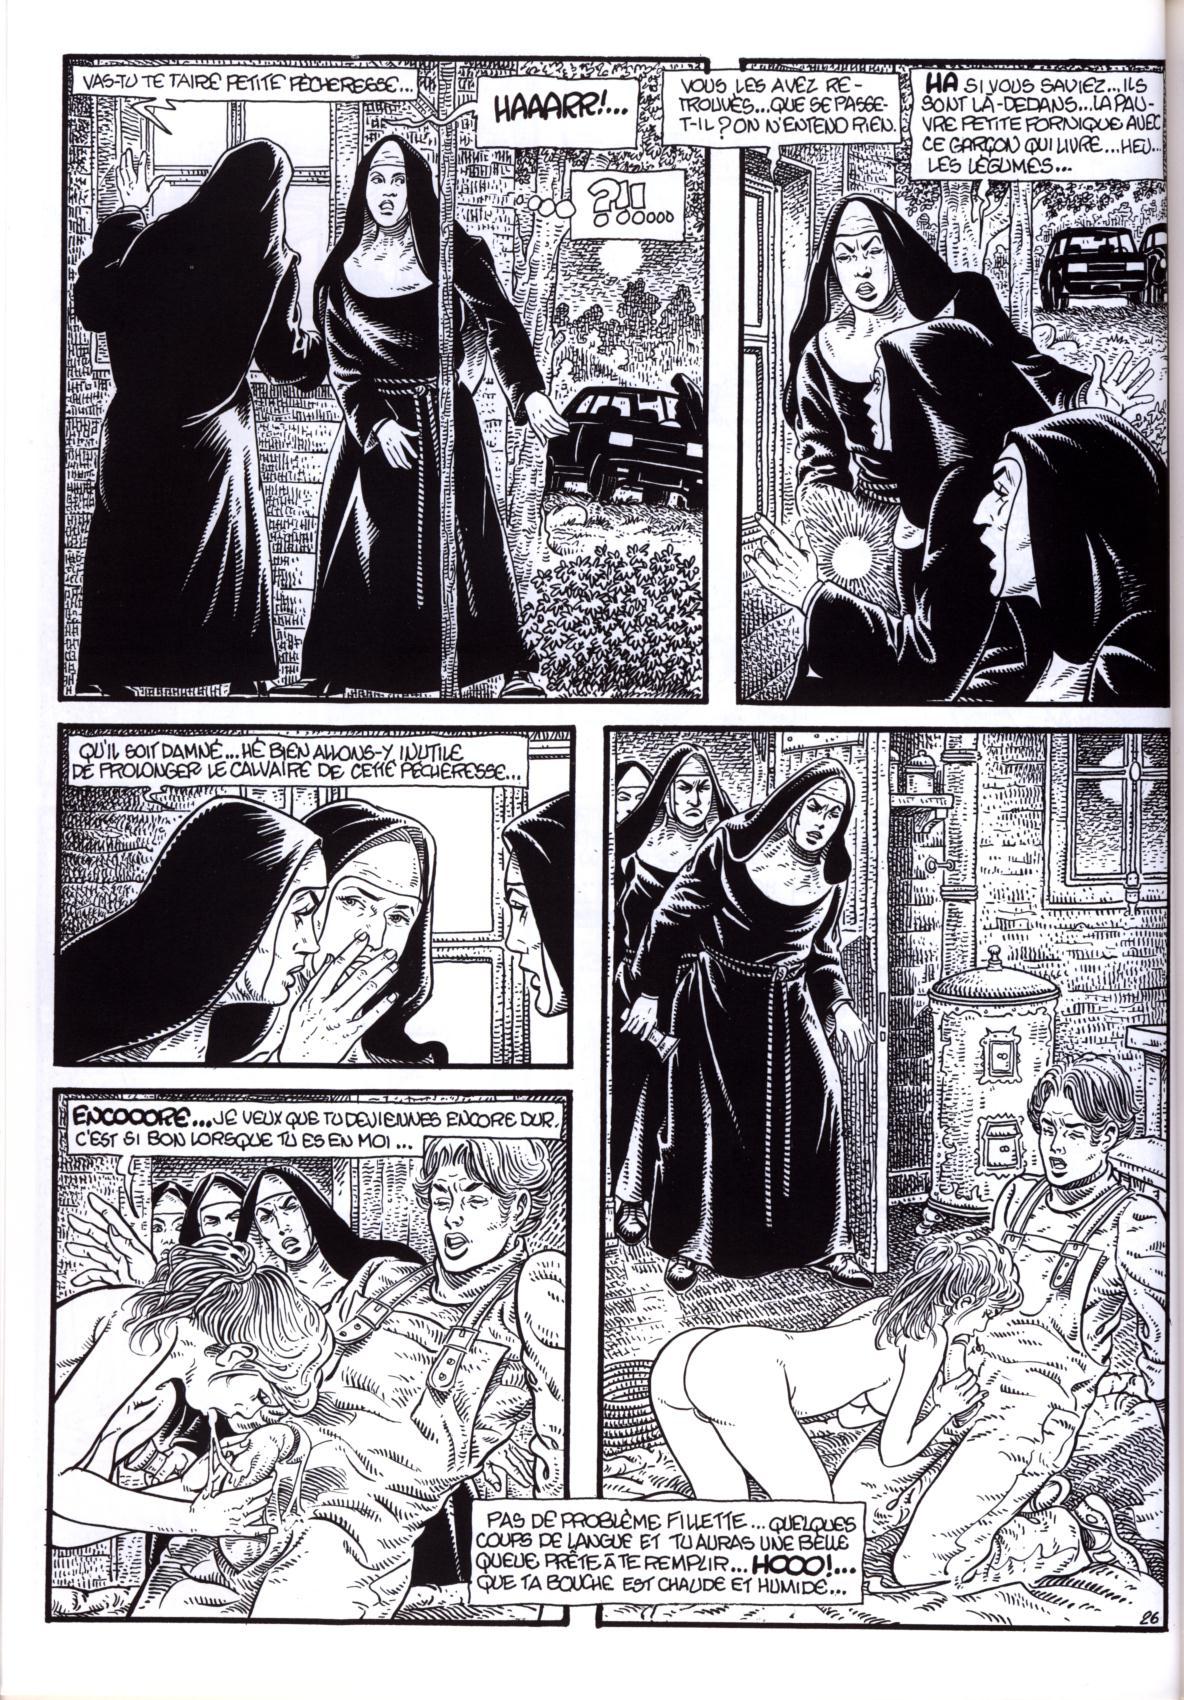 The Mary Magdalene Boarding School - Volume 3 numero d'image 28